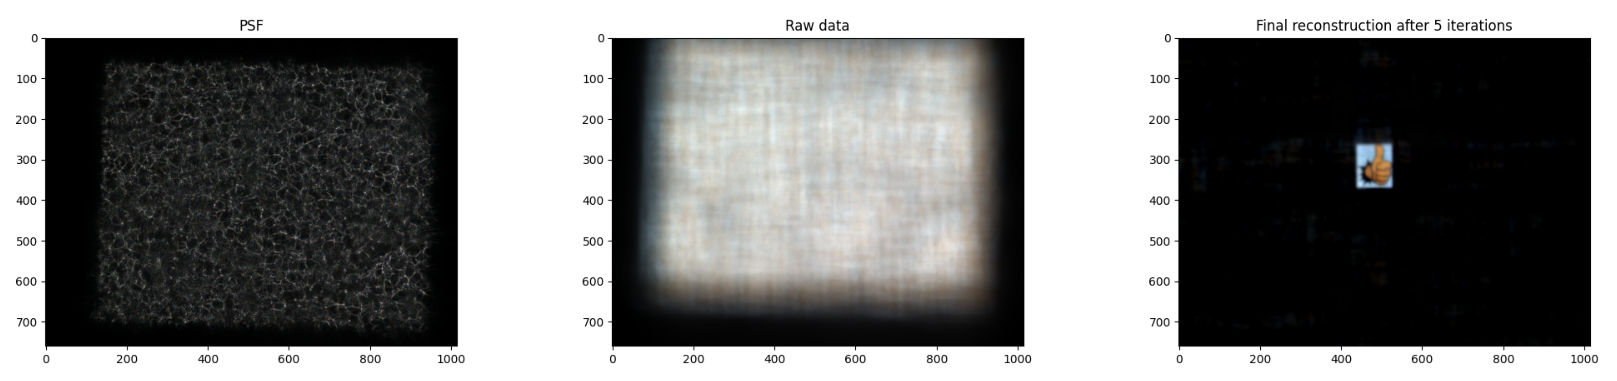 Example PSF, raw data, and reconstruction.